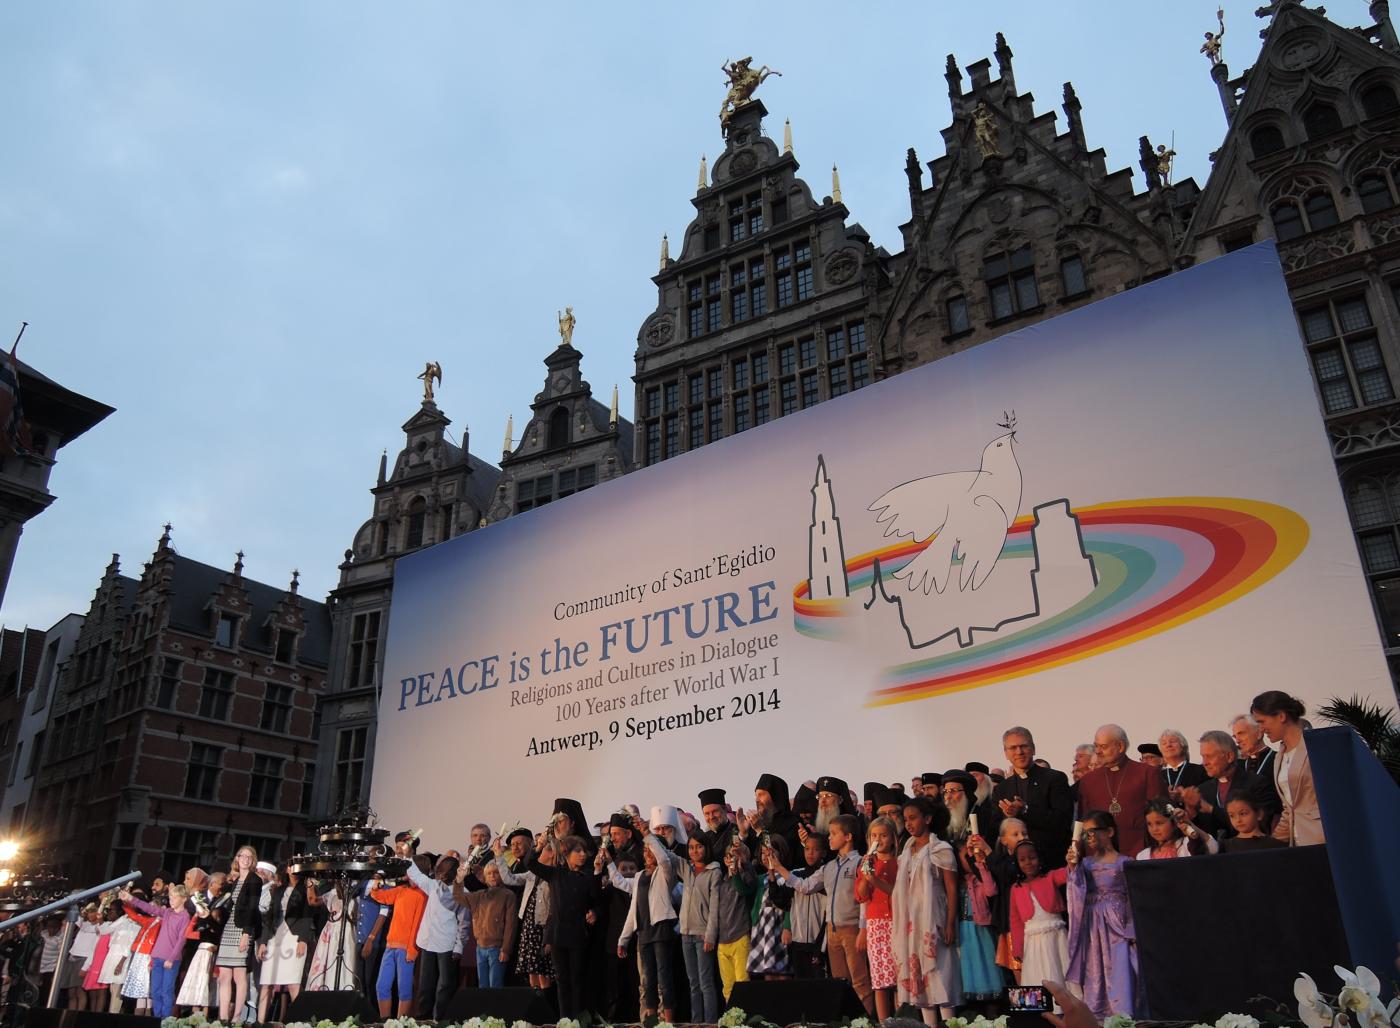 Religious leaders at the Sant’Egidio meeting signed “An Appeal for Peace” at the Grote Markt with thousands of participants.© WCC/Marianne Ejdersten  